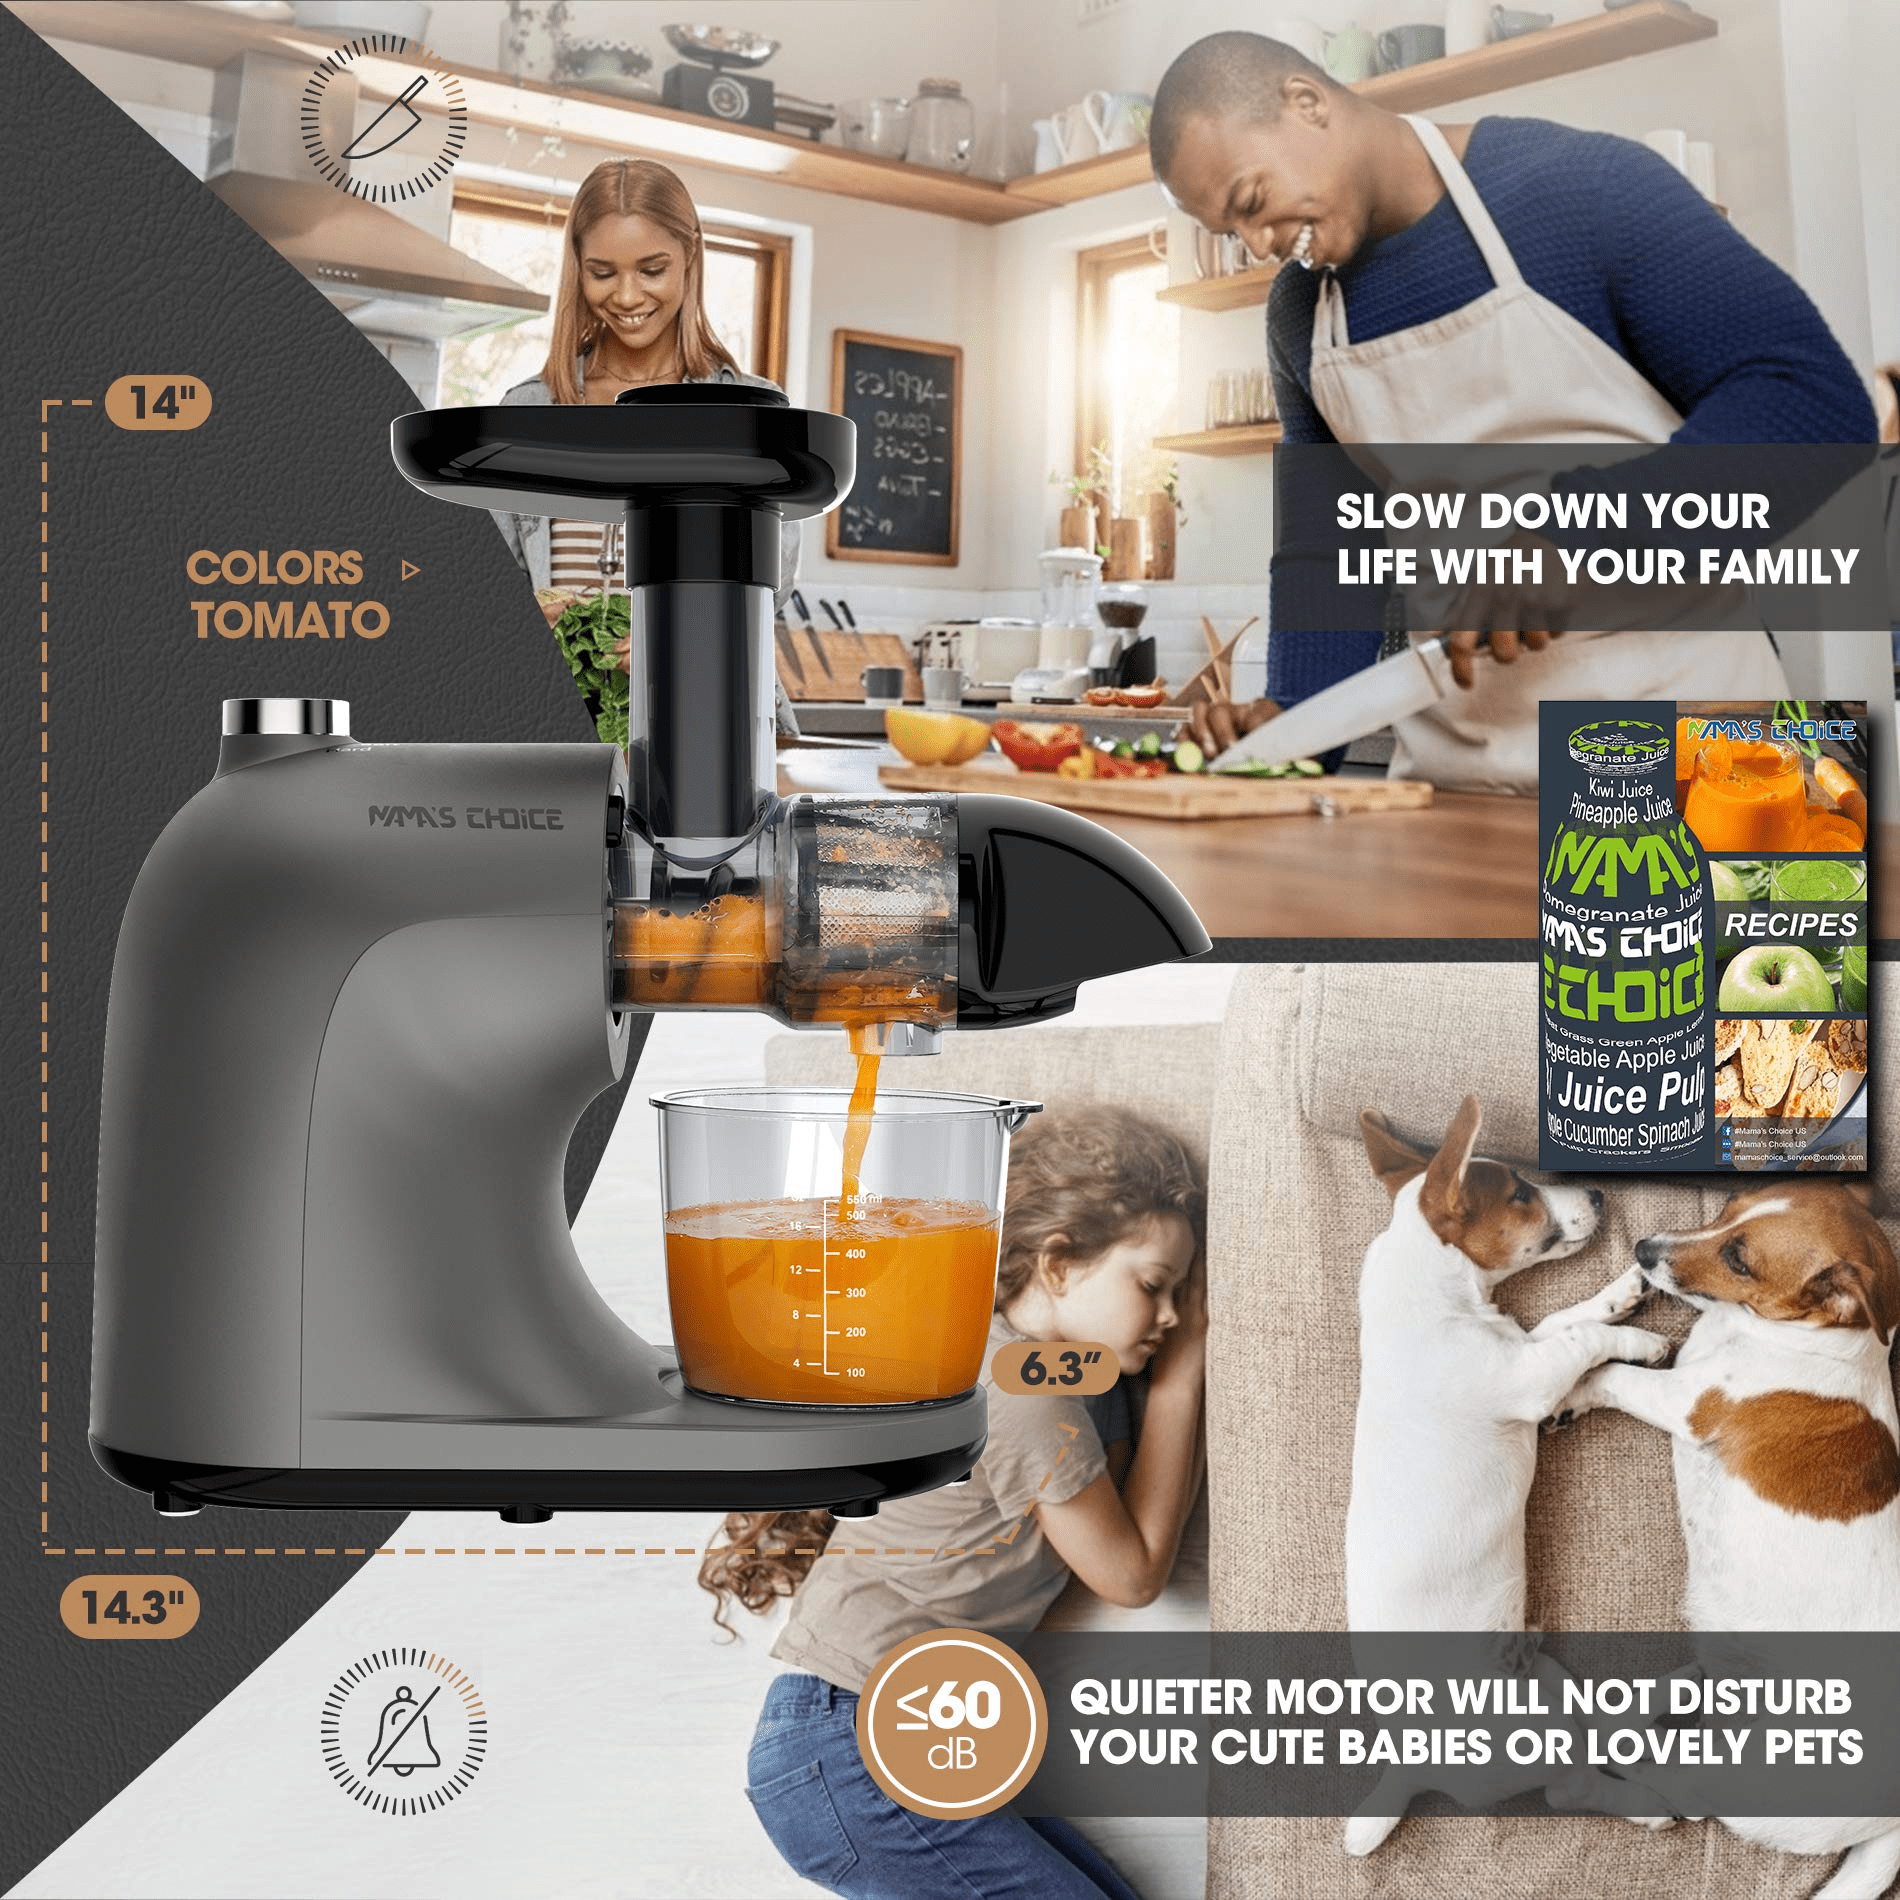  Touch LED Display Masticating Juicer Machines Vegetable and  Fruit, Healnitor Cold Press Slow Juice Extractor Machines with Triple Mode,  Easy to Clean Brush & Quiet Motor, 500ML Travel Bottle, Black 